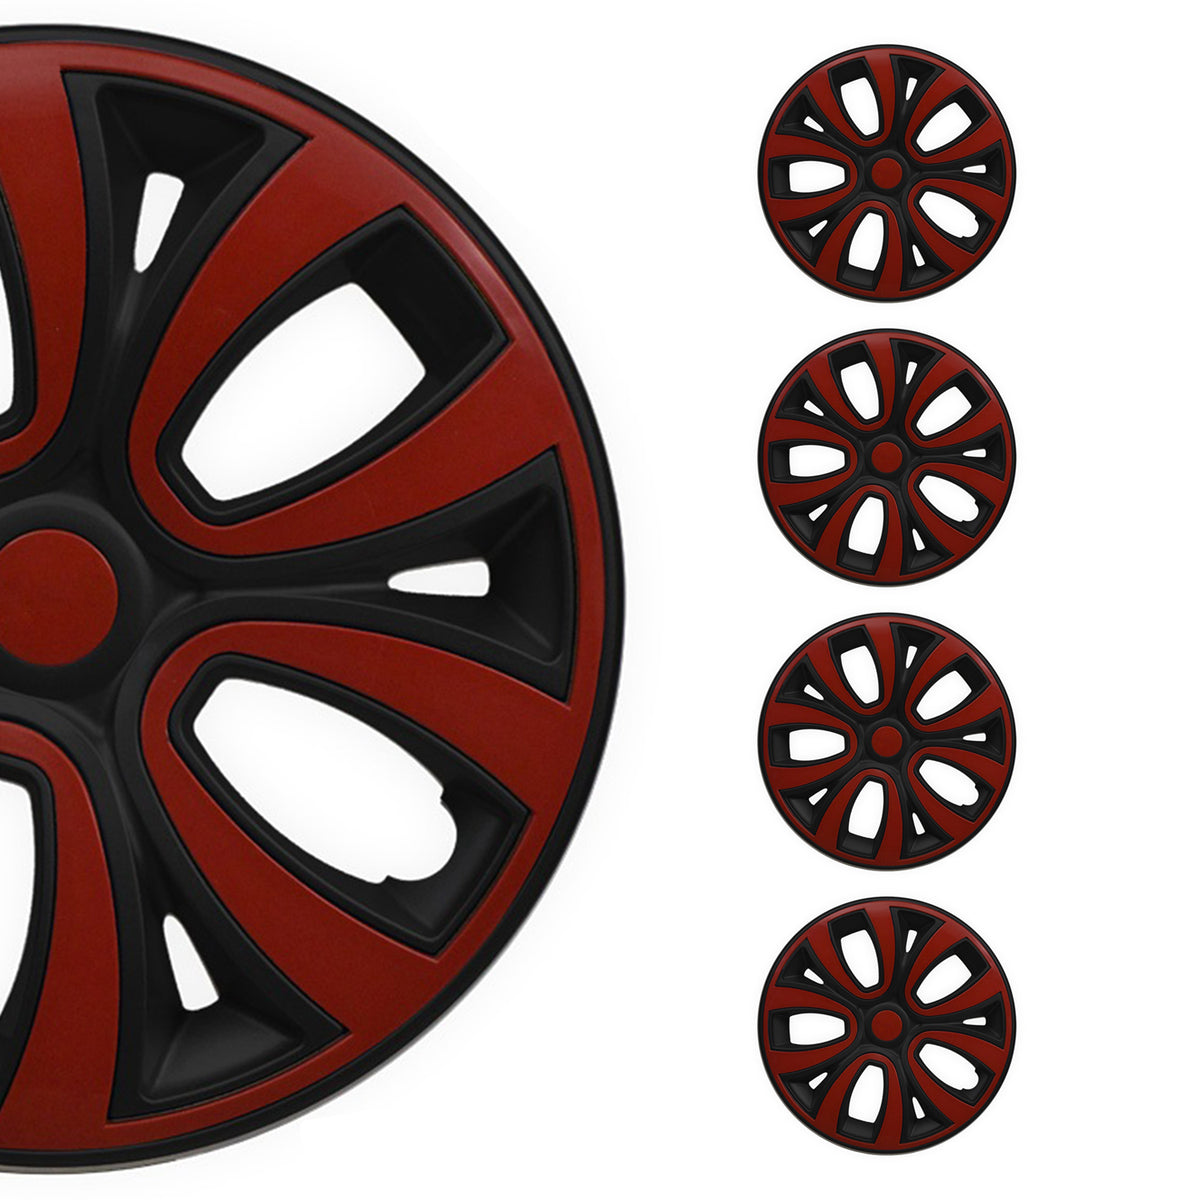 4x wheel covers, wheel covers, hubcaps, 15" inch steel rims, black-red